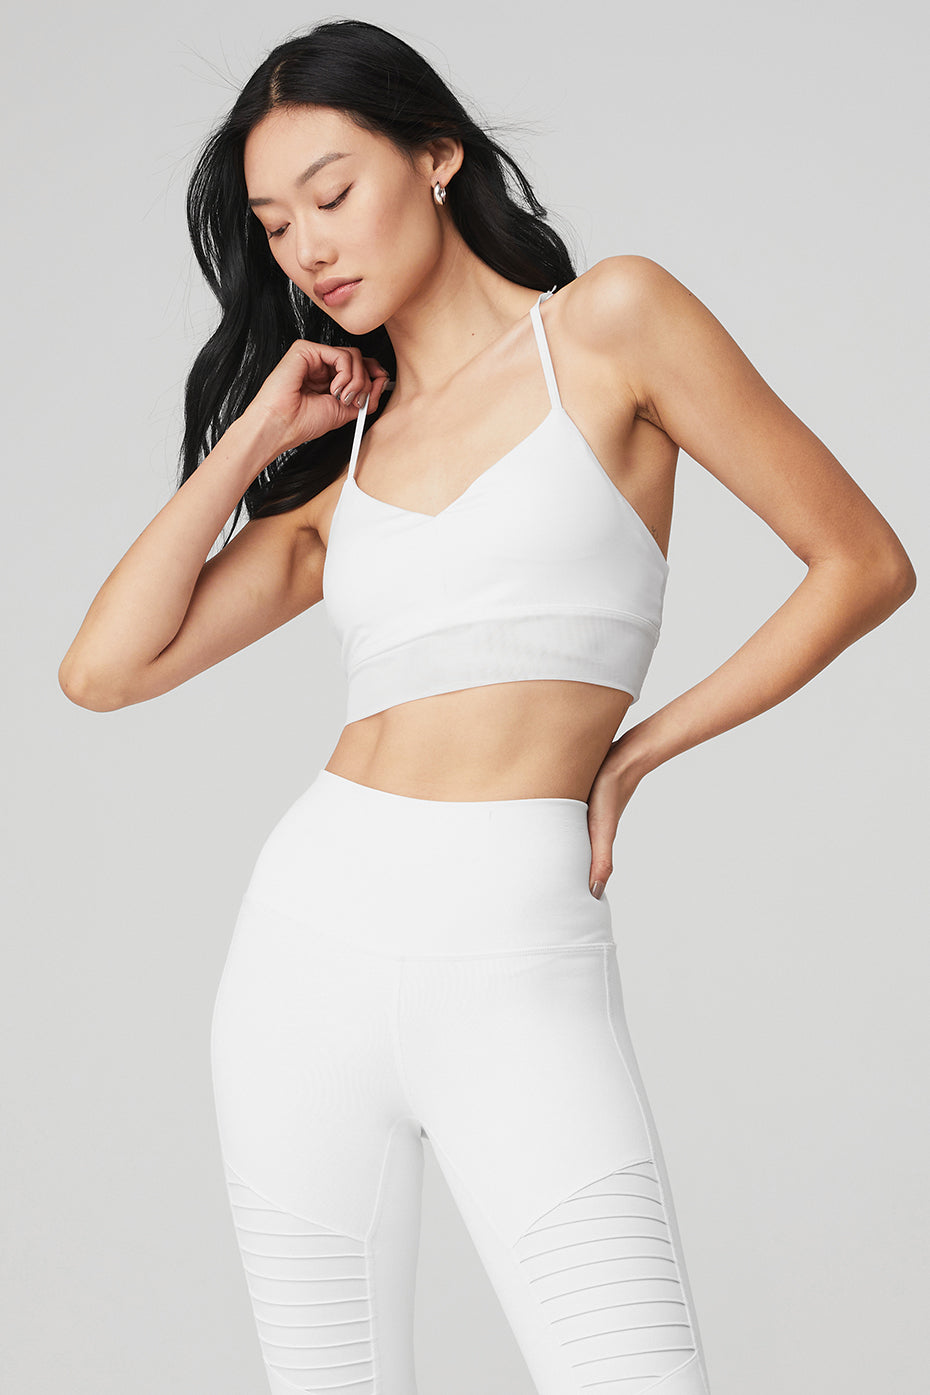 Yogalicious White Sports Bra Size XL - $10 (41% Off Retail) - From